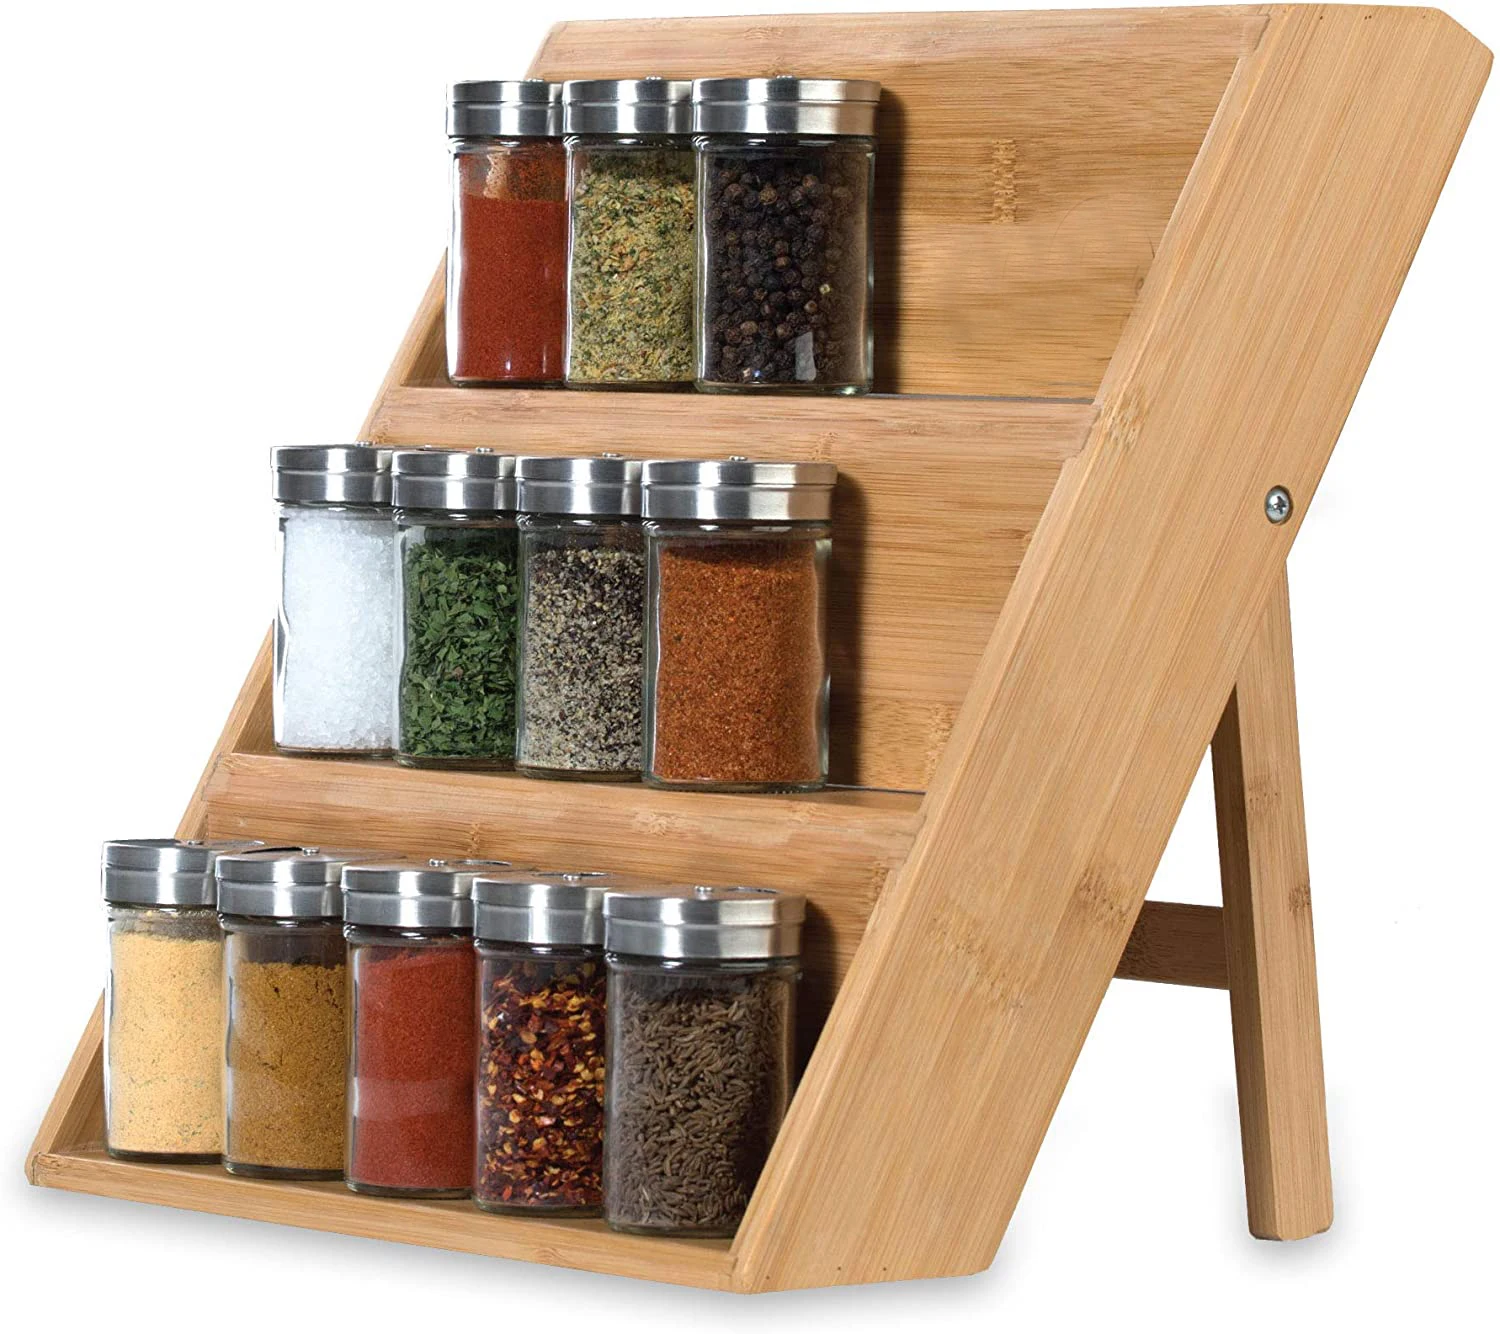 

Bamboo Spice Rack Organizer For Counter top Eco Friendly Seasoning Organizer 3-Tier Spice Shelf Space Saving Wooden Spice Rack, Natural bamboo color